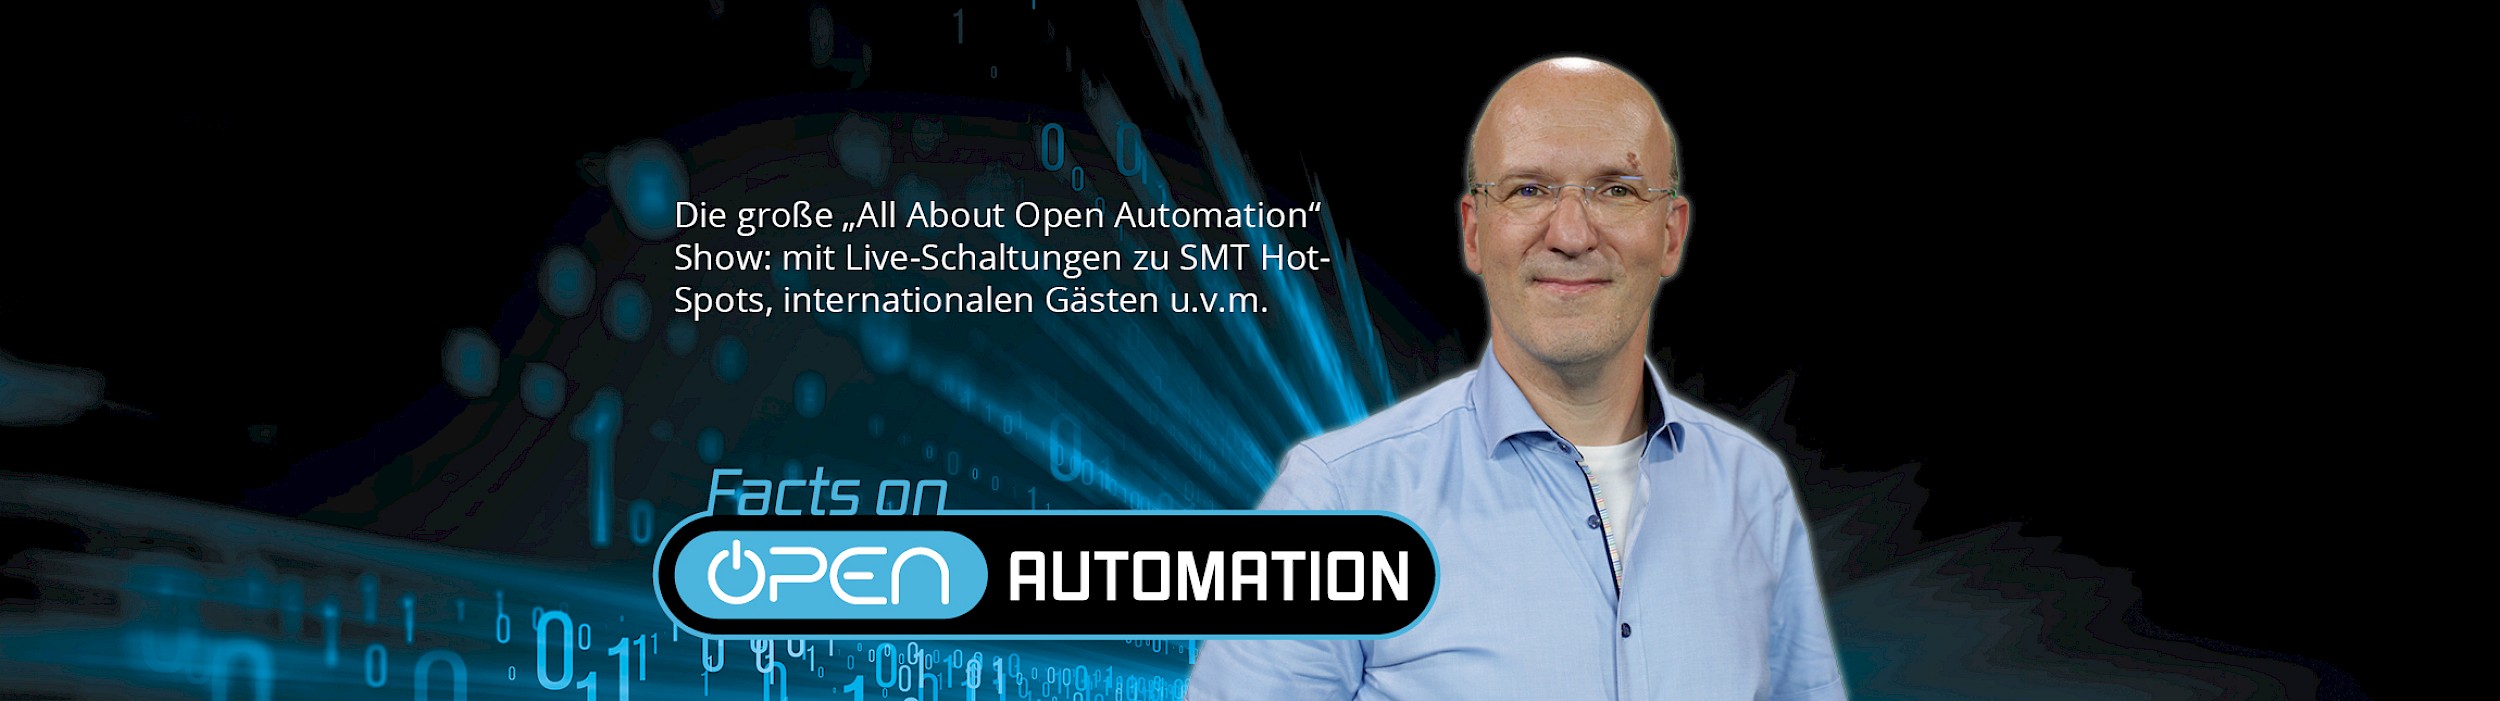 Facts on Open Automation